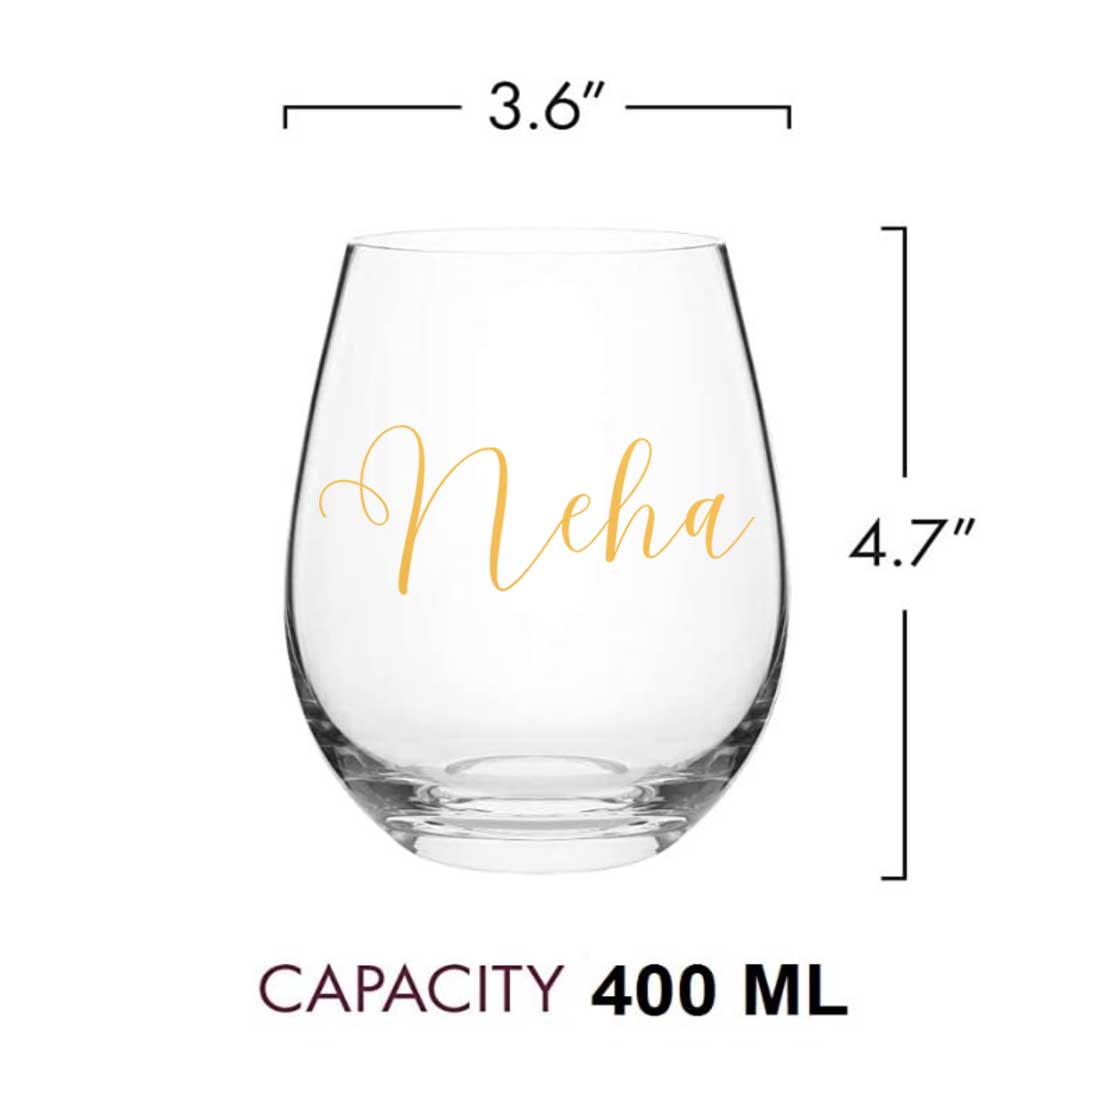 Personalised Glasses for Mocktails Unique Drinking Glasses - Name